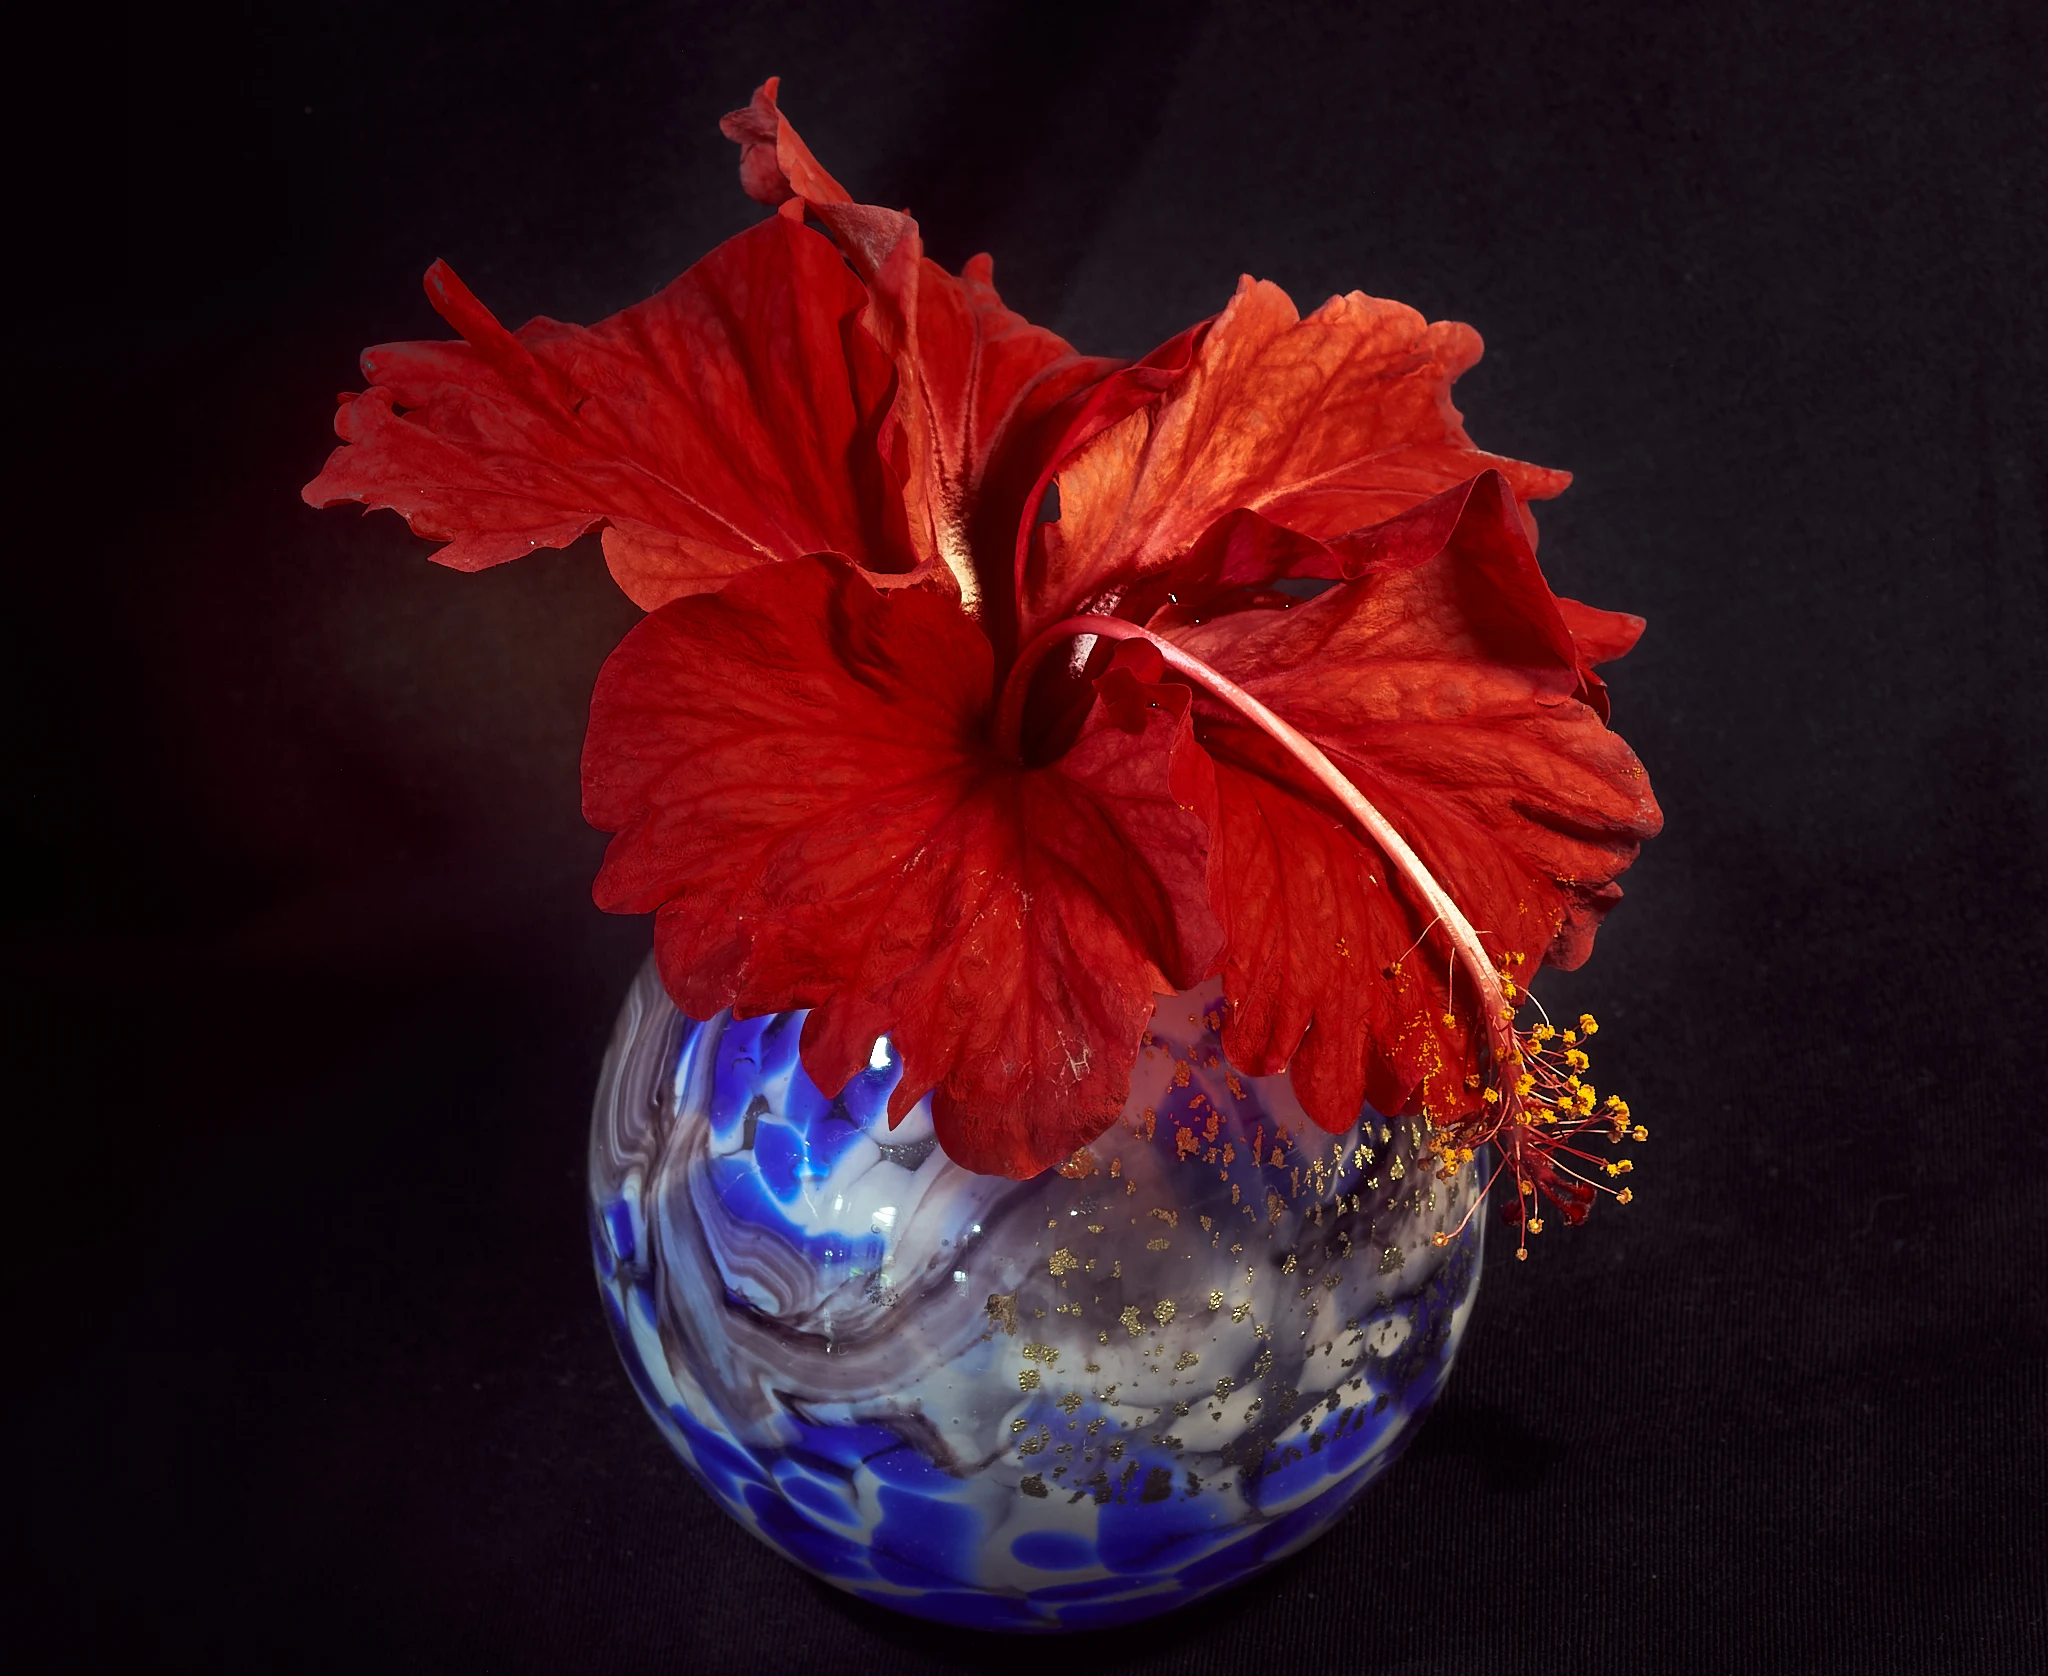 Red Hibiscus Gold Flaked Blue Vase Studio Close-up Gentle HDR Capture 1